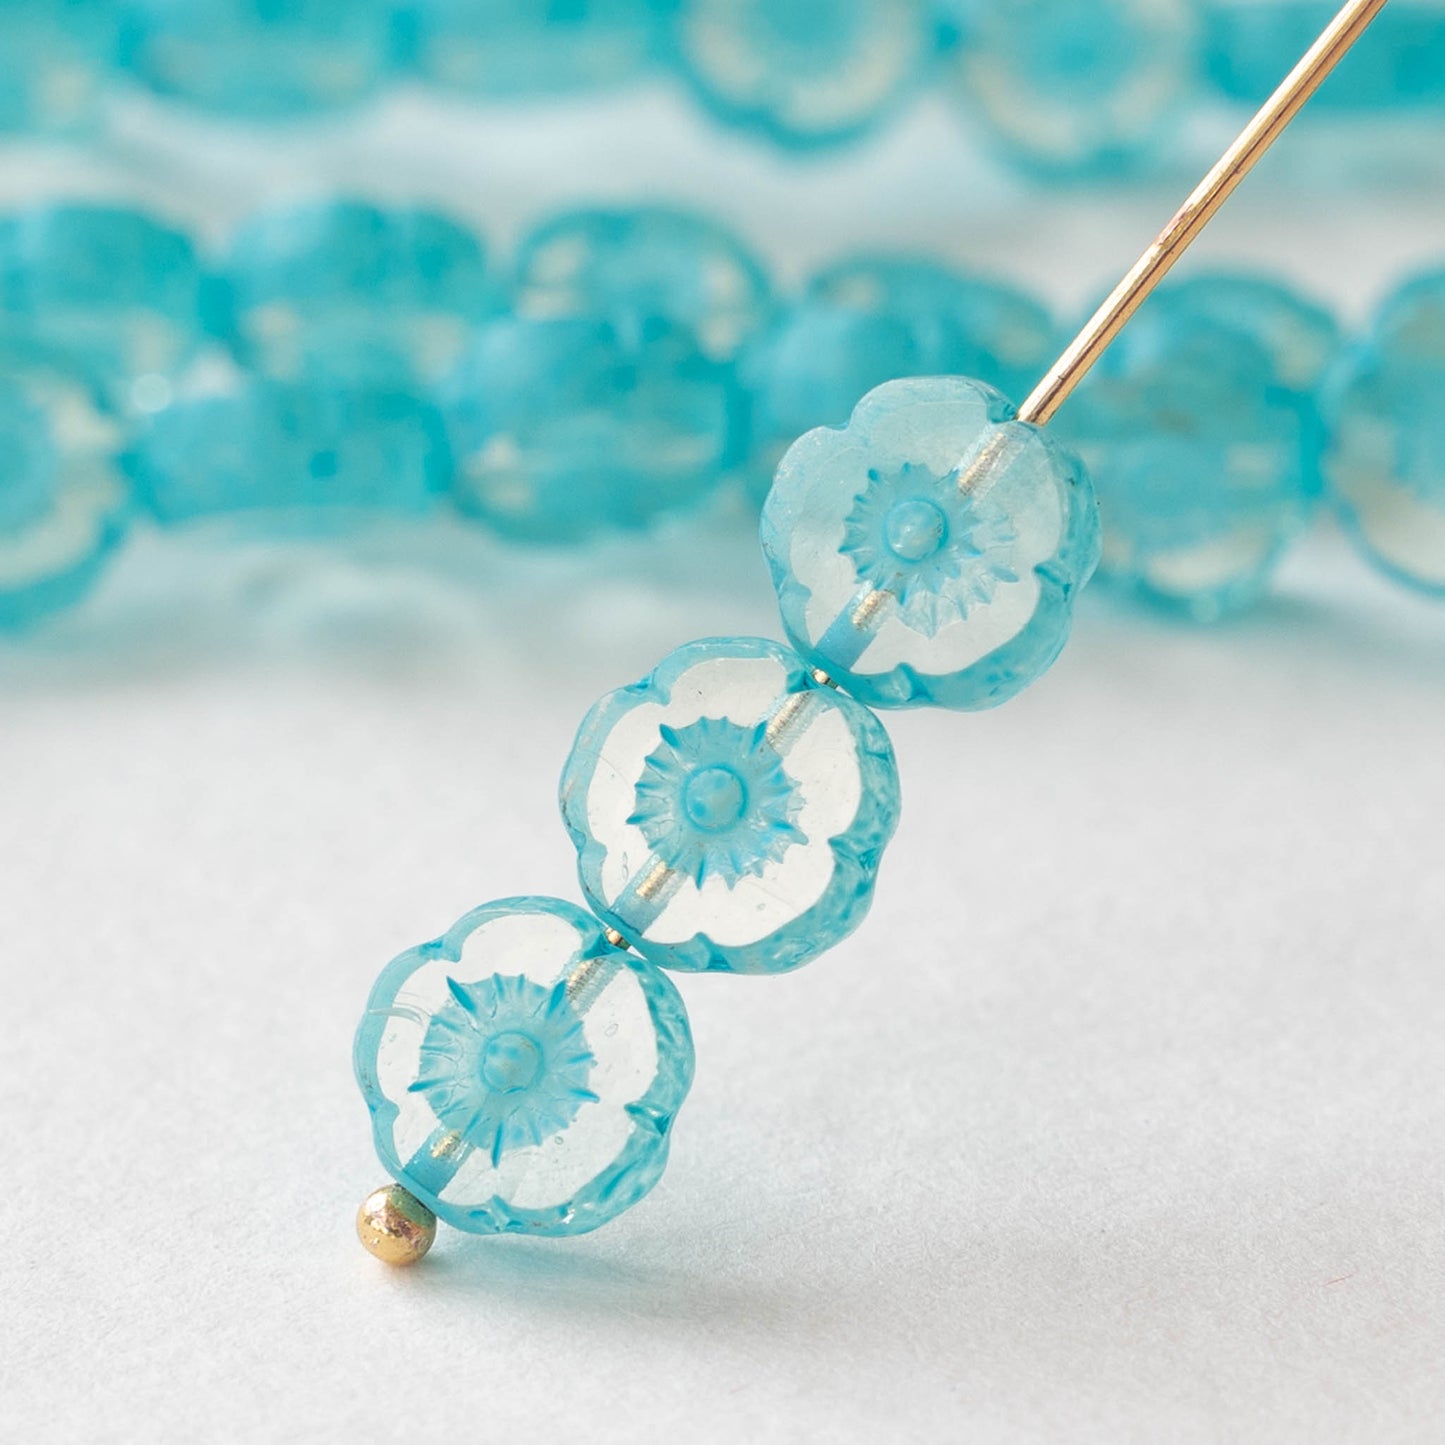 8mm Flower Beads - Crystal with Aqua -20 Beads